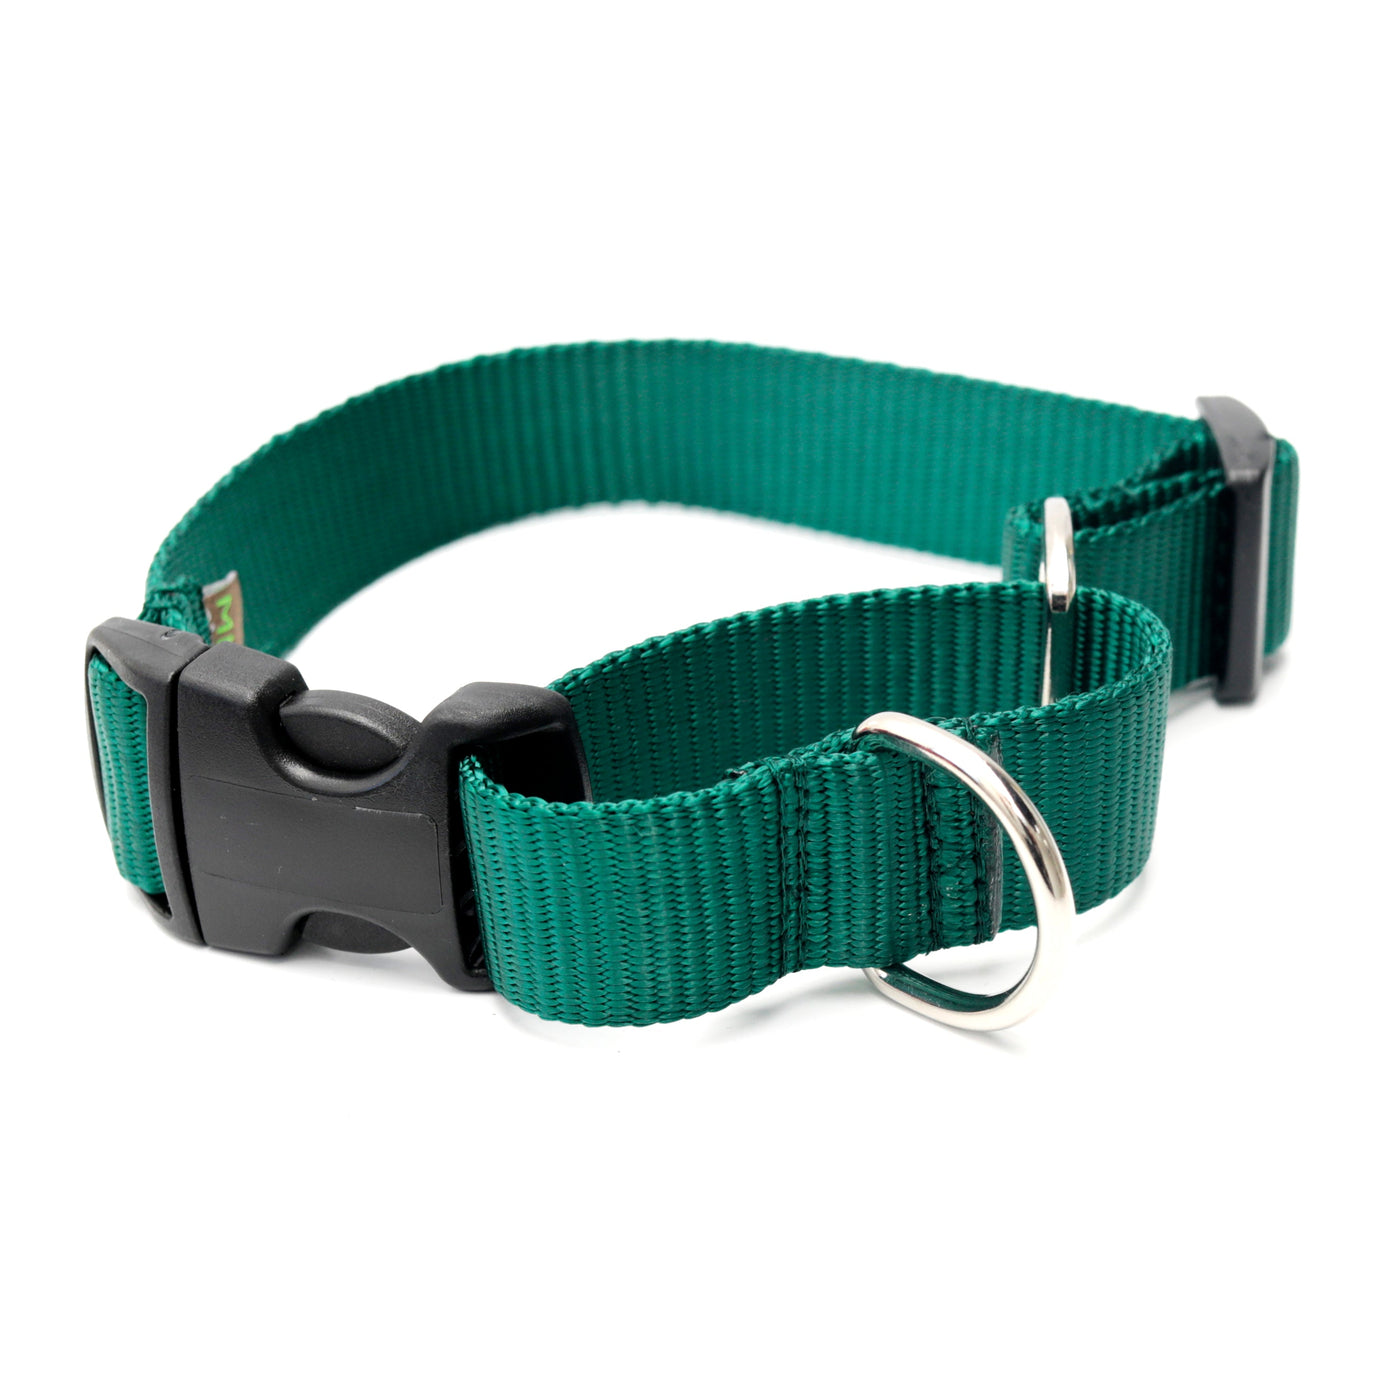 Mimi Green Martingale Personalized Dog Collar Collar Mimi Green Forest Green 